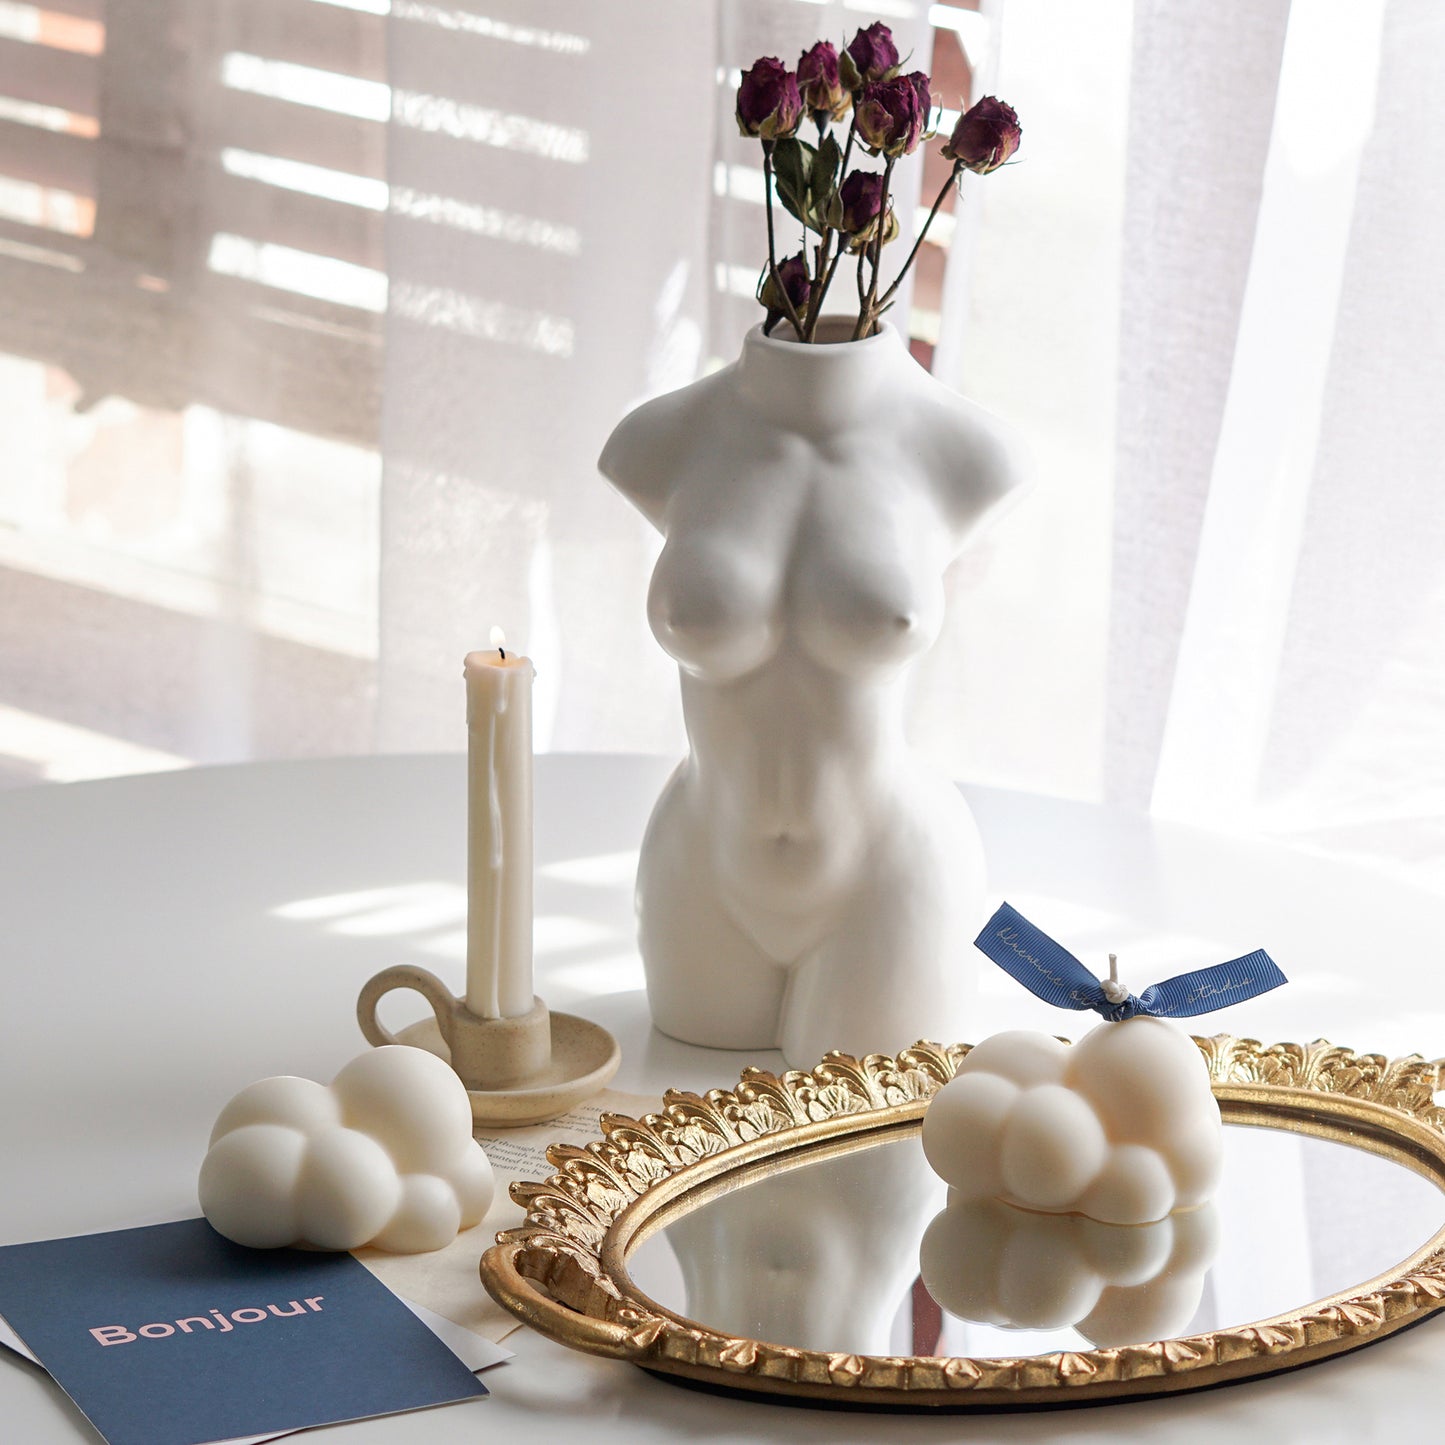 white cloud soy pillar candle with a blue bluewine studio ribbon on a round gold french mirror tray, cloud wax melt, blue bonjour postcard, a lit taper candle in a ceramic candle holder, and burgundy dried flowers in a ceramic feminine body vase